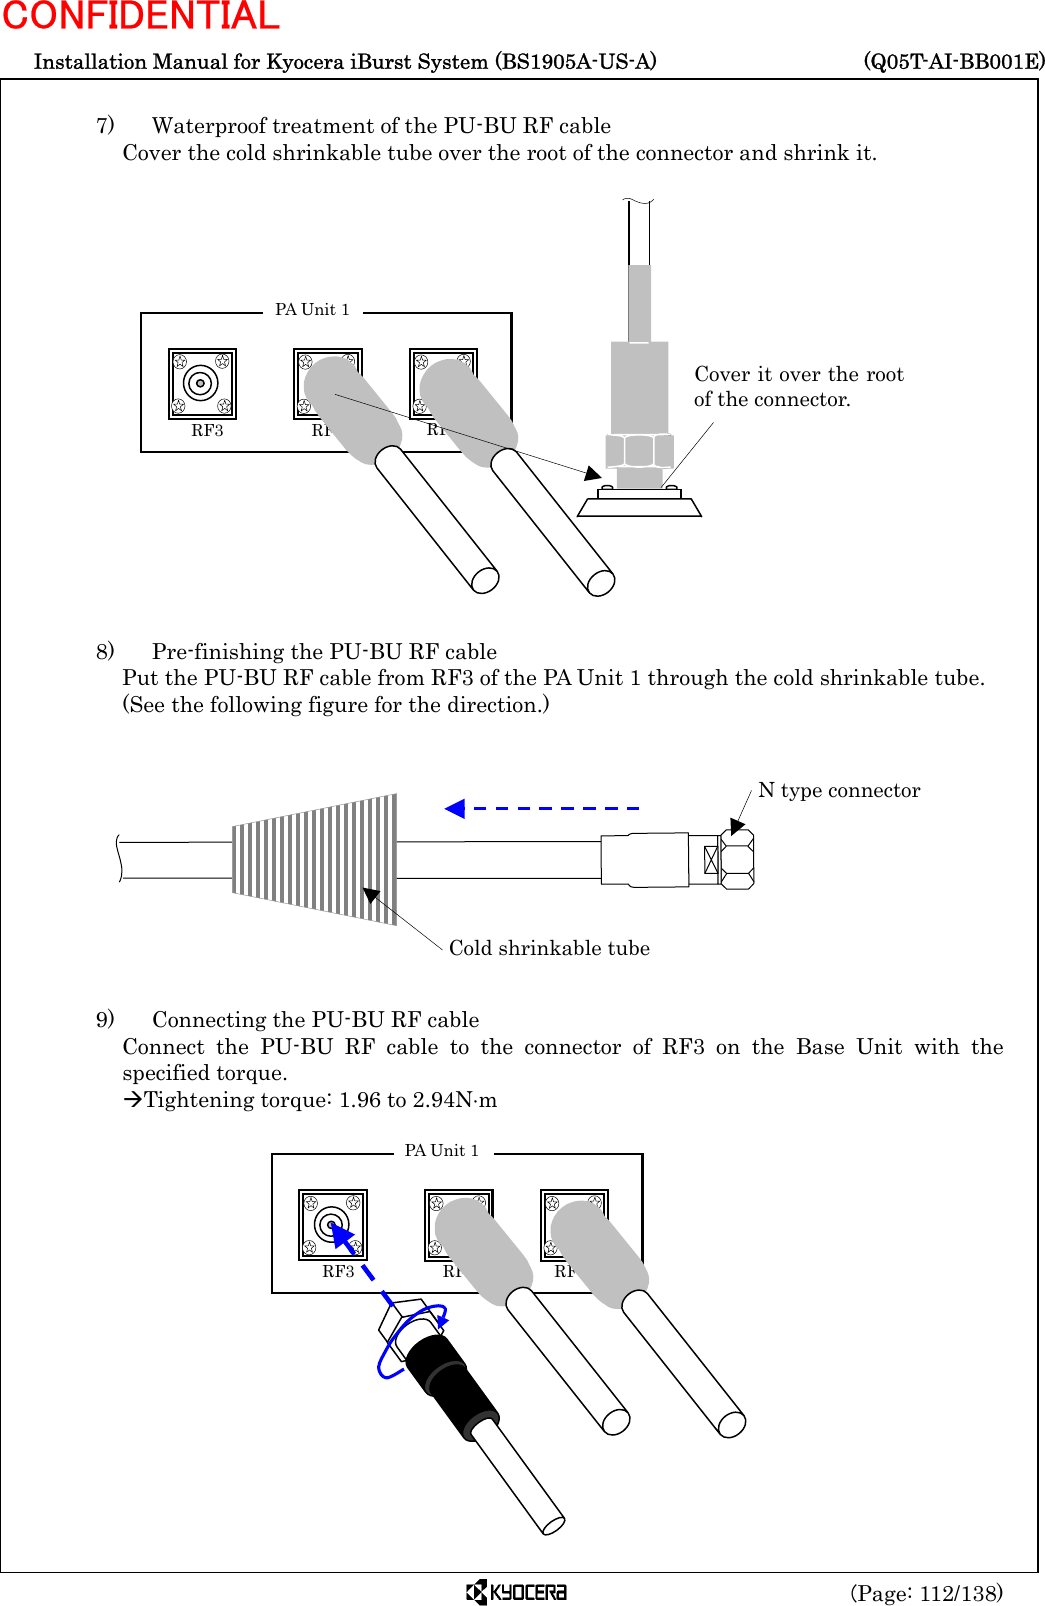  Installation Manual for Kyocera iBurst System (BS1905A-US-A)     (Q05T-AI-BB001E) (Page: 112/138) CONFIDENTIAL  7)    Waterproof treatment of the PU-BU RF cable Cover the cold shrinkable tube over the root of the connector and shrink it.                   8)    Pre-finishing the PU-BU RF cable Put the PU-BU RF cable from RF3 of the PA Unit 1 through the cold shrinkable tube.   (See the following figure for the direction.)            9)    Connecting the PU-BU RF cable Connect the PU-BU RF cable to the connector of RF3 on the Base Unit with the specified torque. ÆTightening torque: 1.96 to 2.94N⋅m                Cold shrinkable tube N type connector Cover it over the rootof the connector.  RF3    RF2 RF1 PA Unit 1  RF3    RF2 RF1 PA Unit 1 